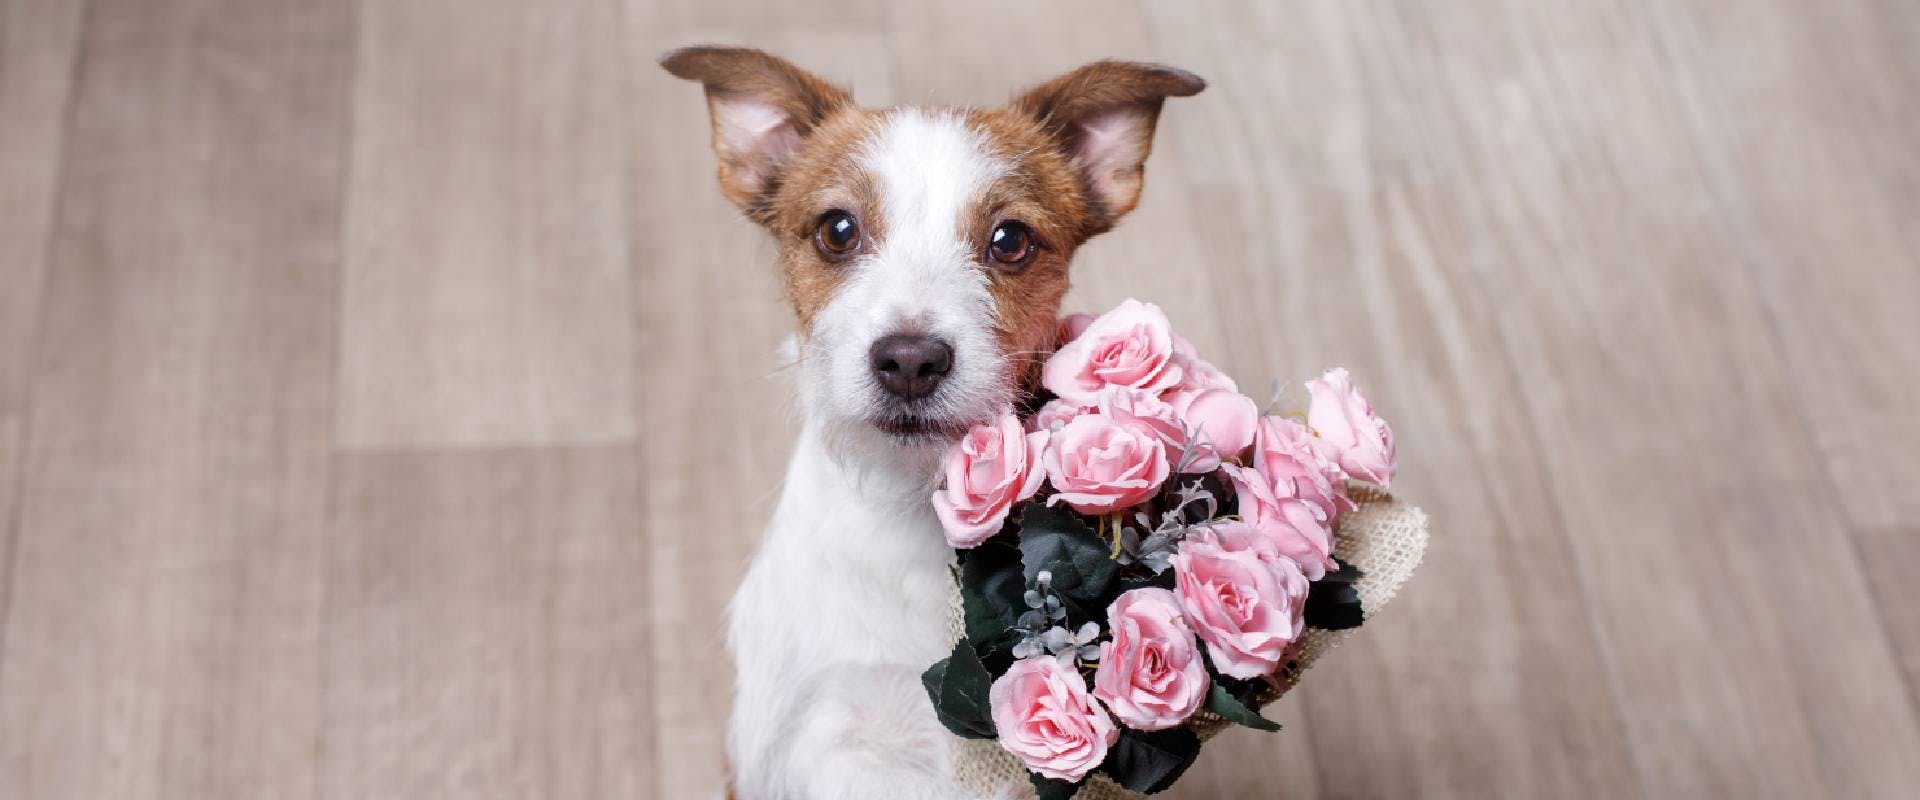 Dog holding a bunch of pink roses